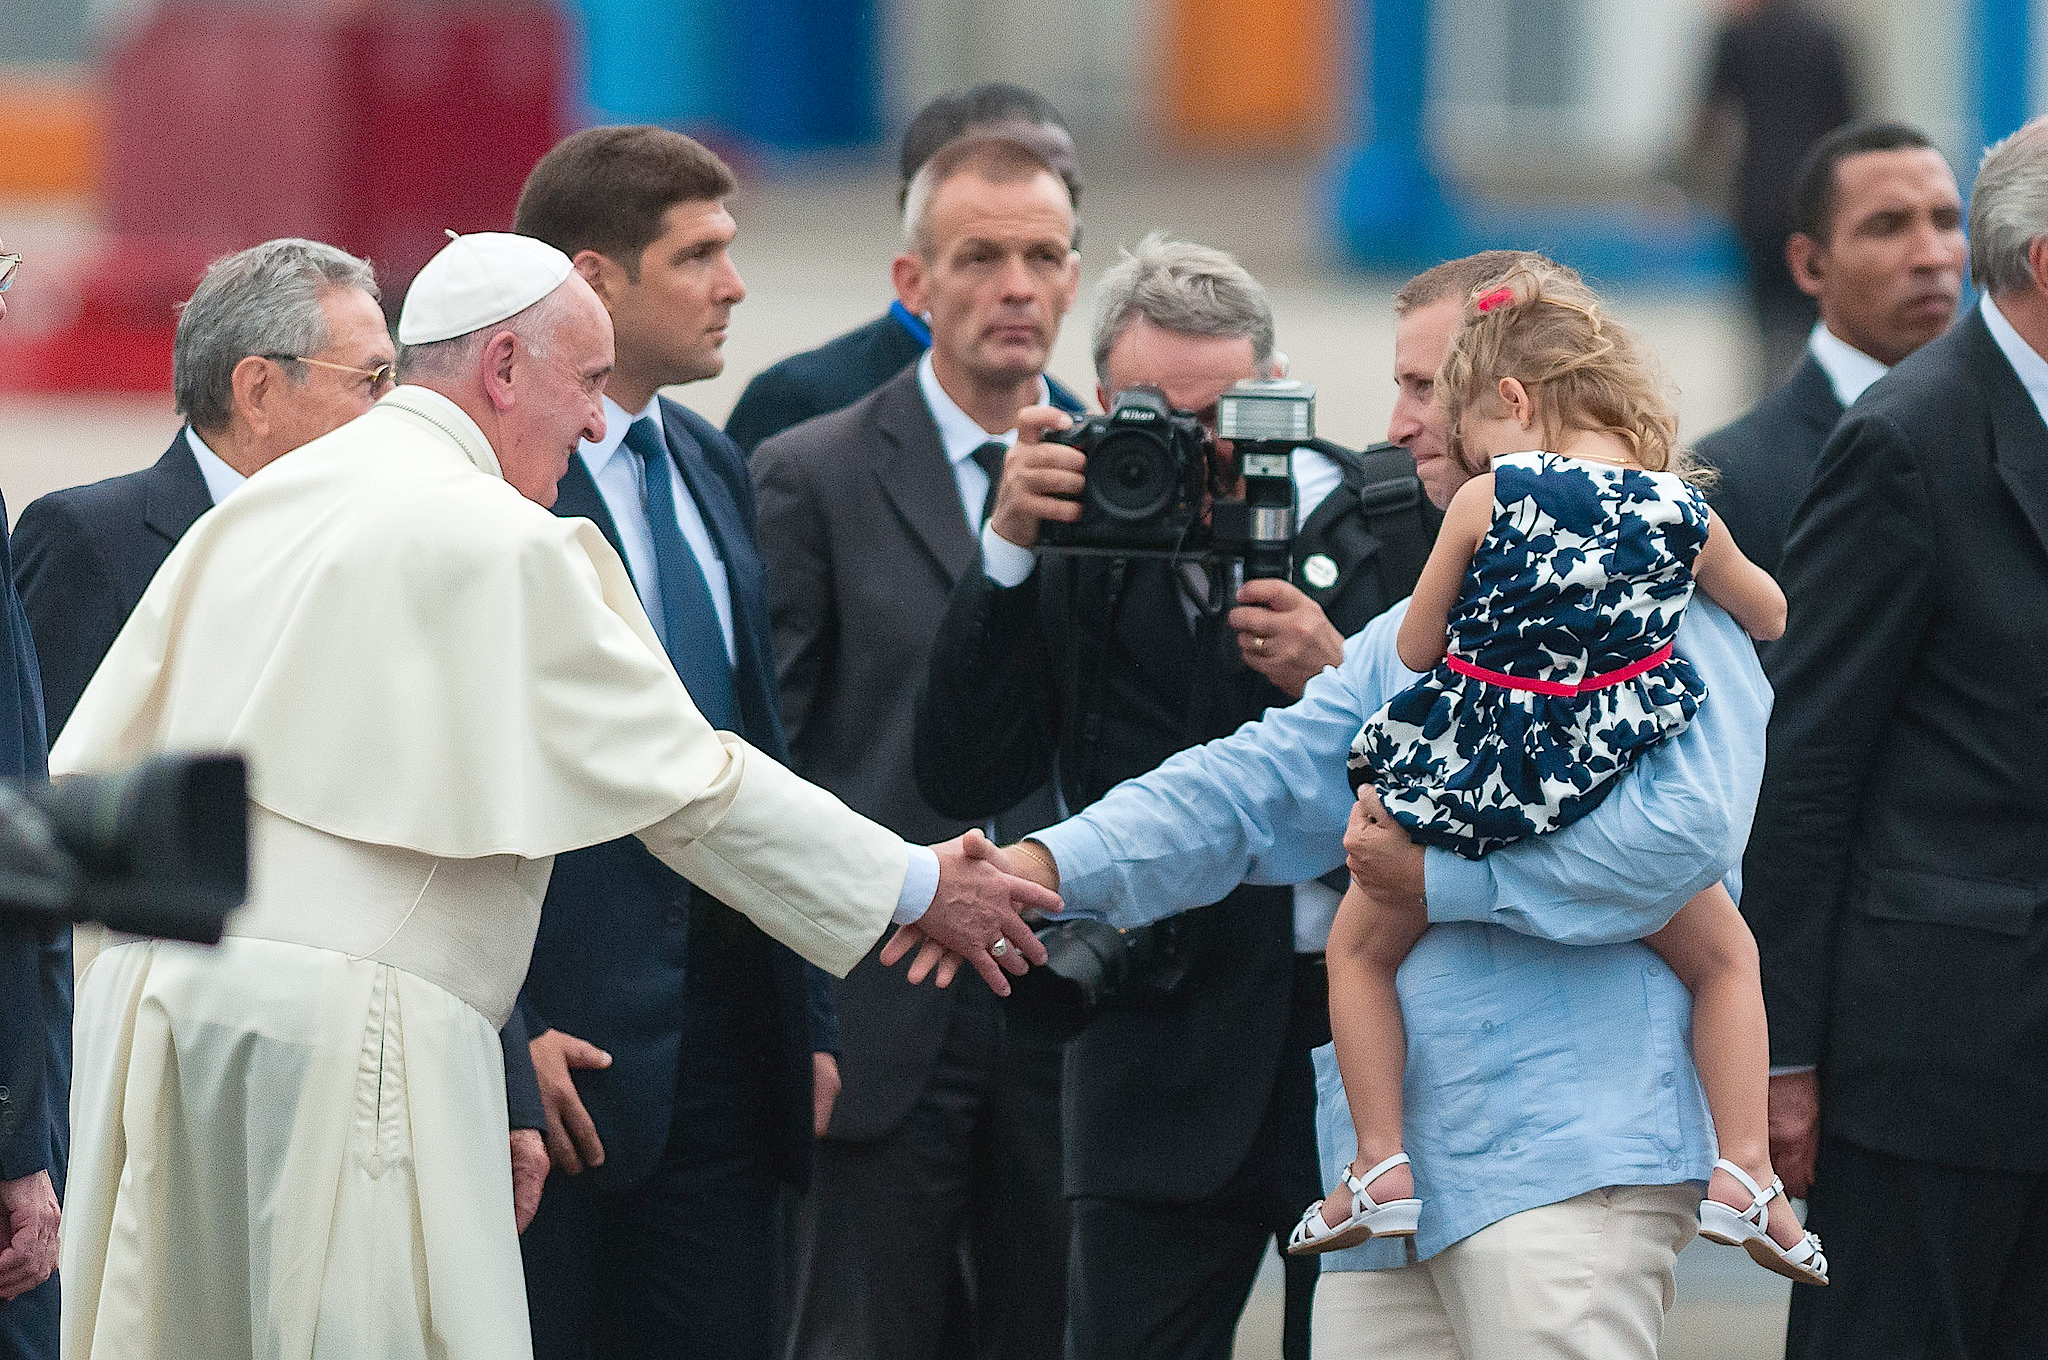 Pope Francis in the airport Martí at La Havana - 19 September 2015